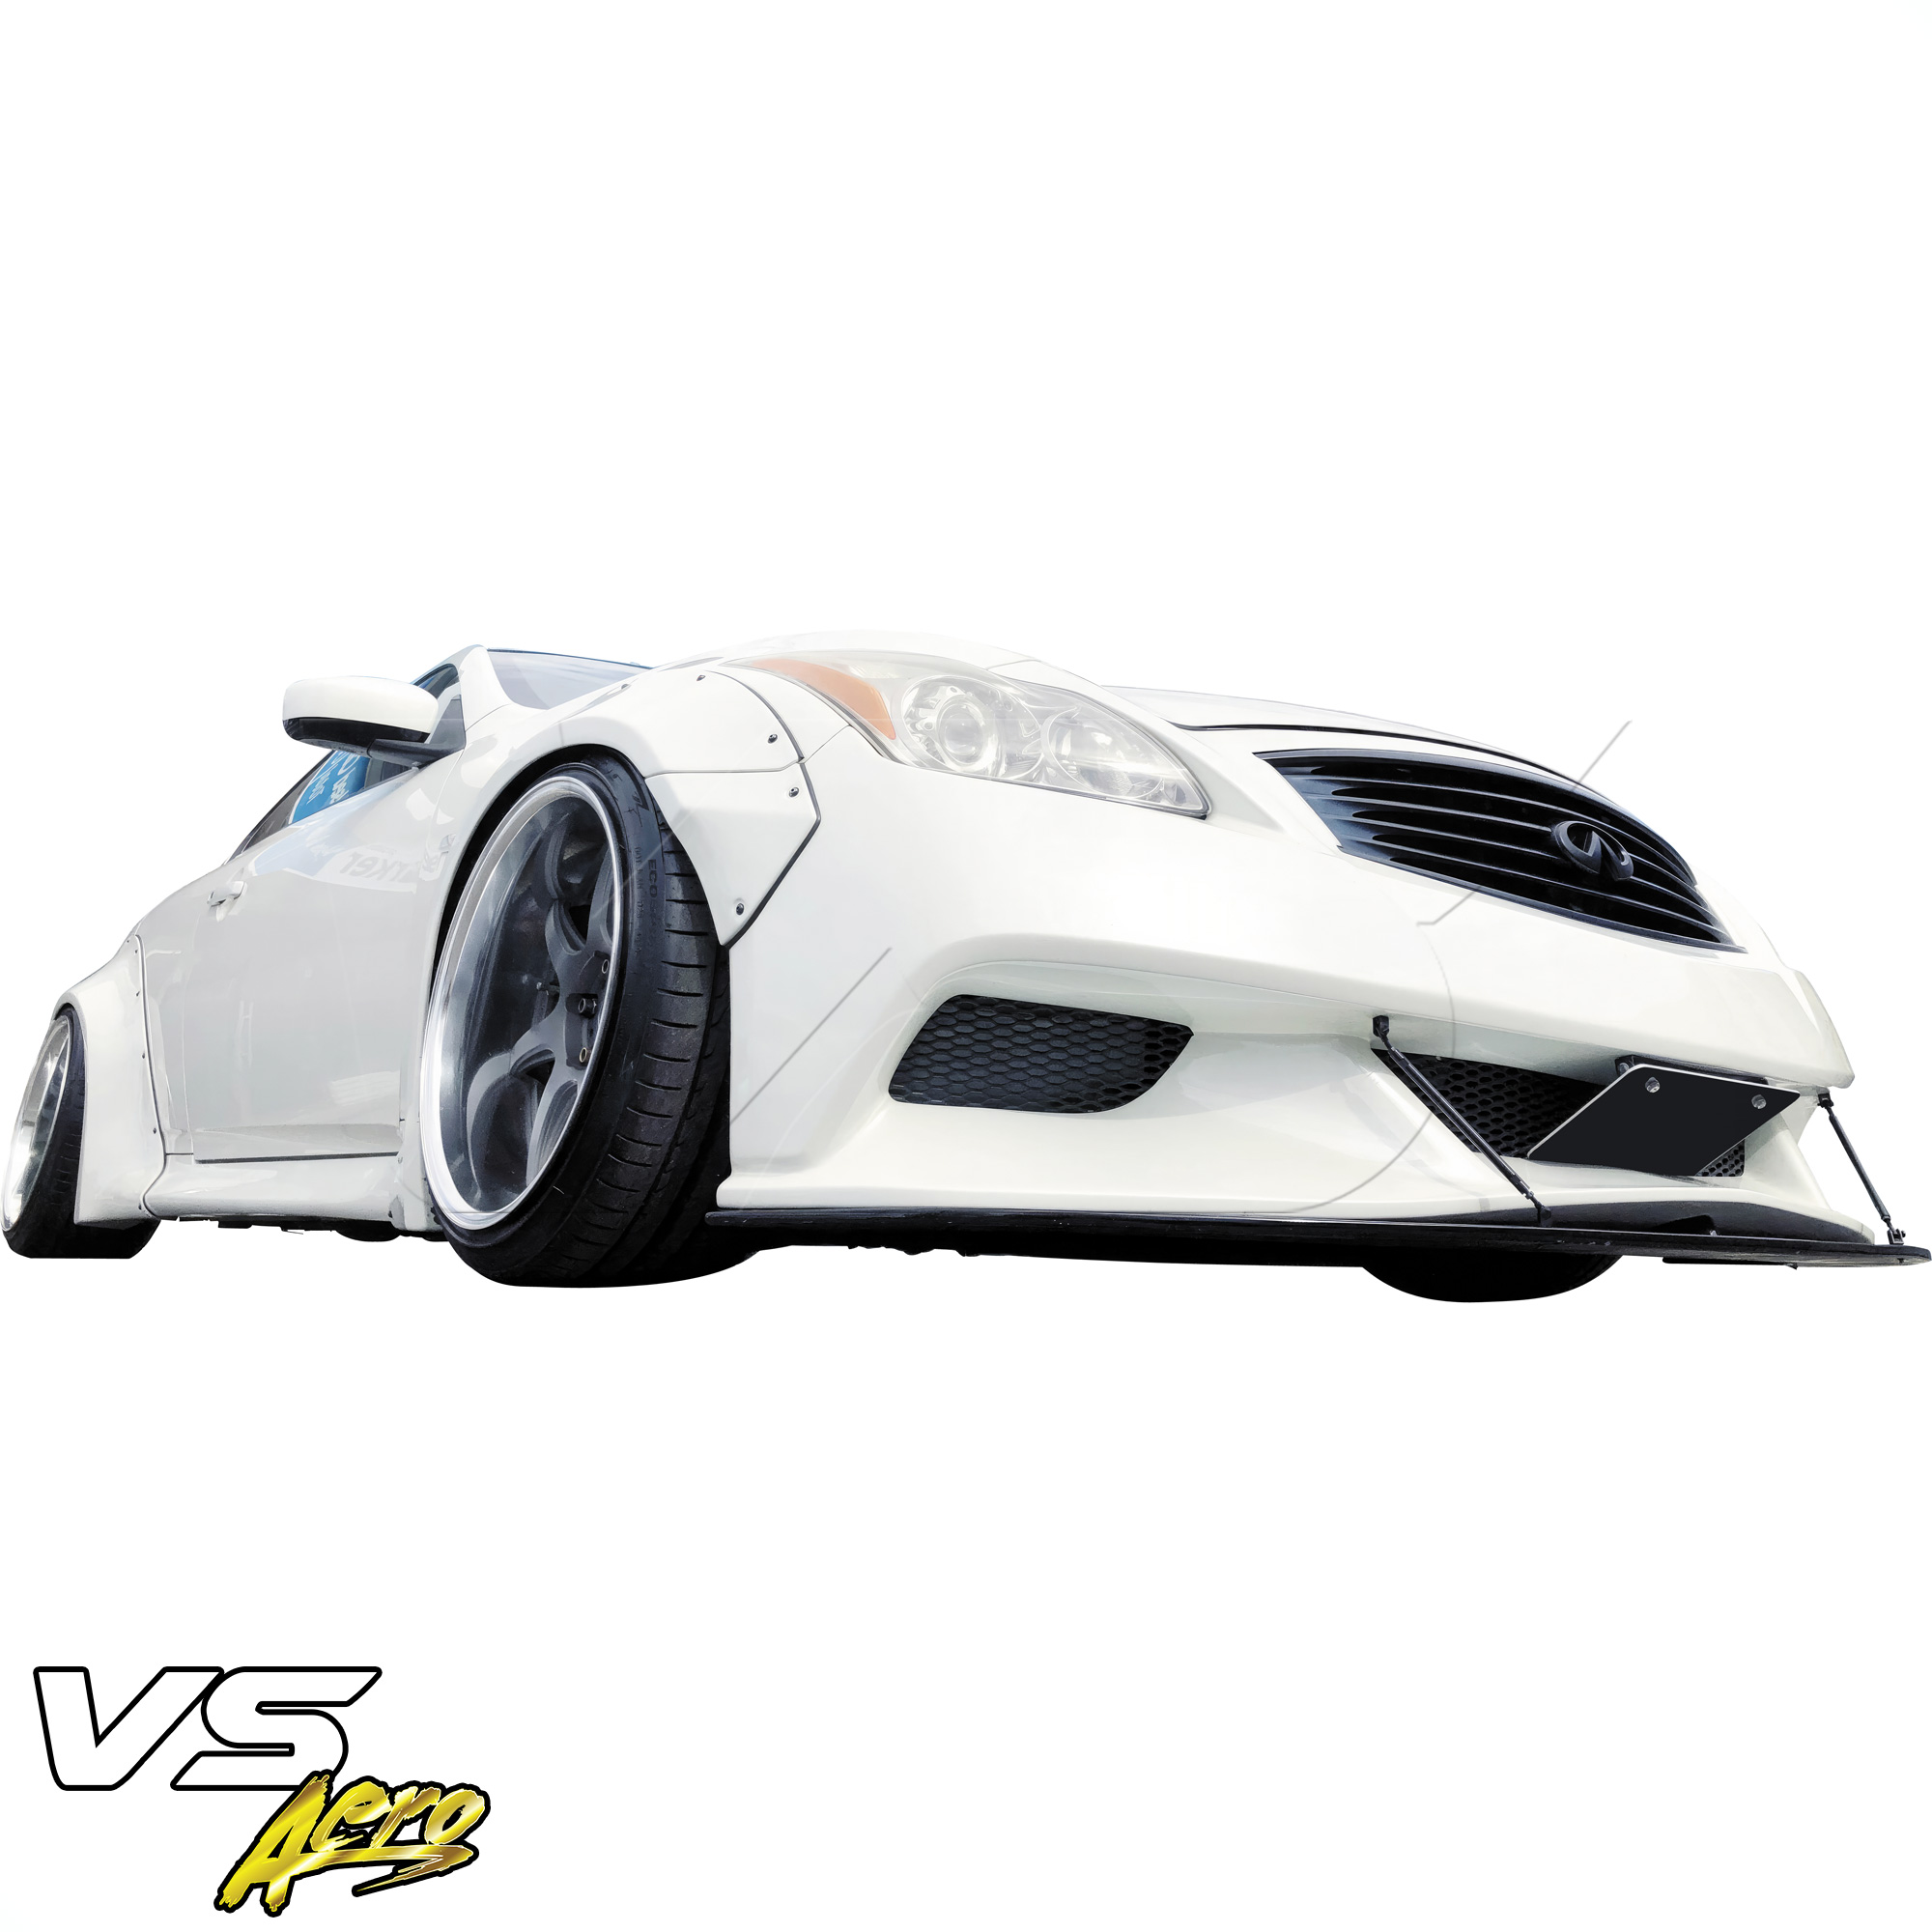 VSaero FRP LBPE Wide Body Fender Flares (front) 4pc > Infiniti G37 Coupe 2008-2015 > 2dr Coupe - Image 30